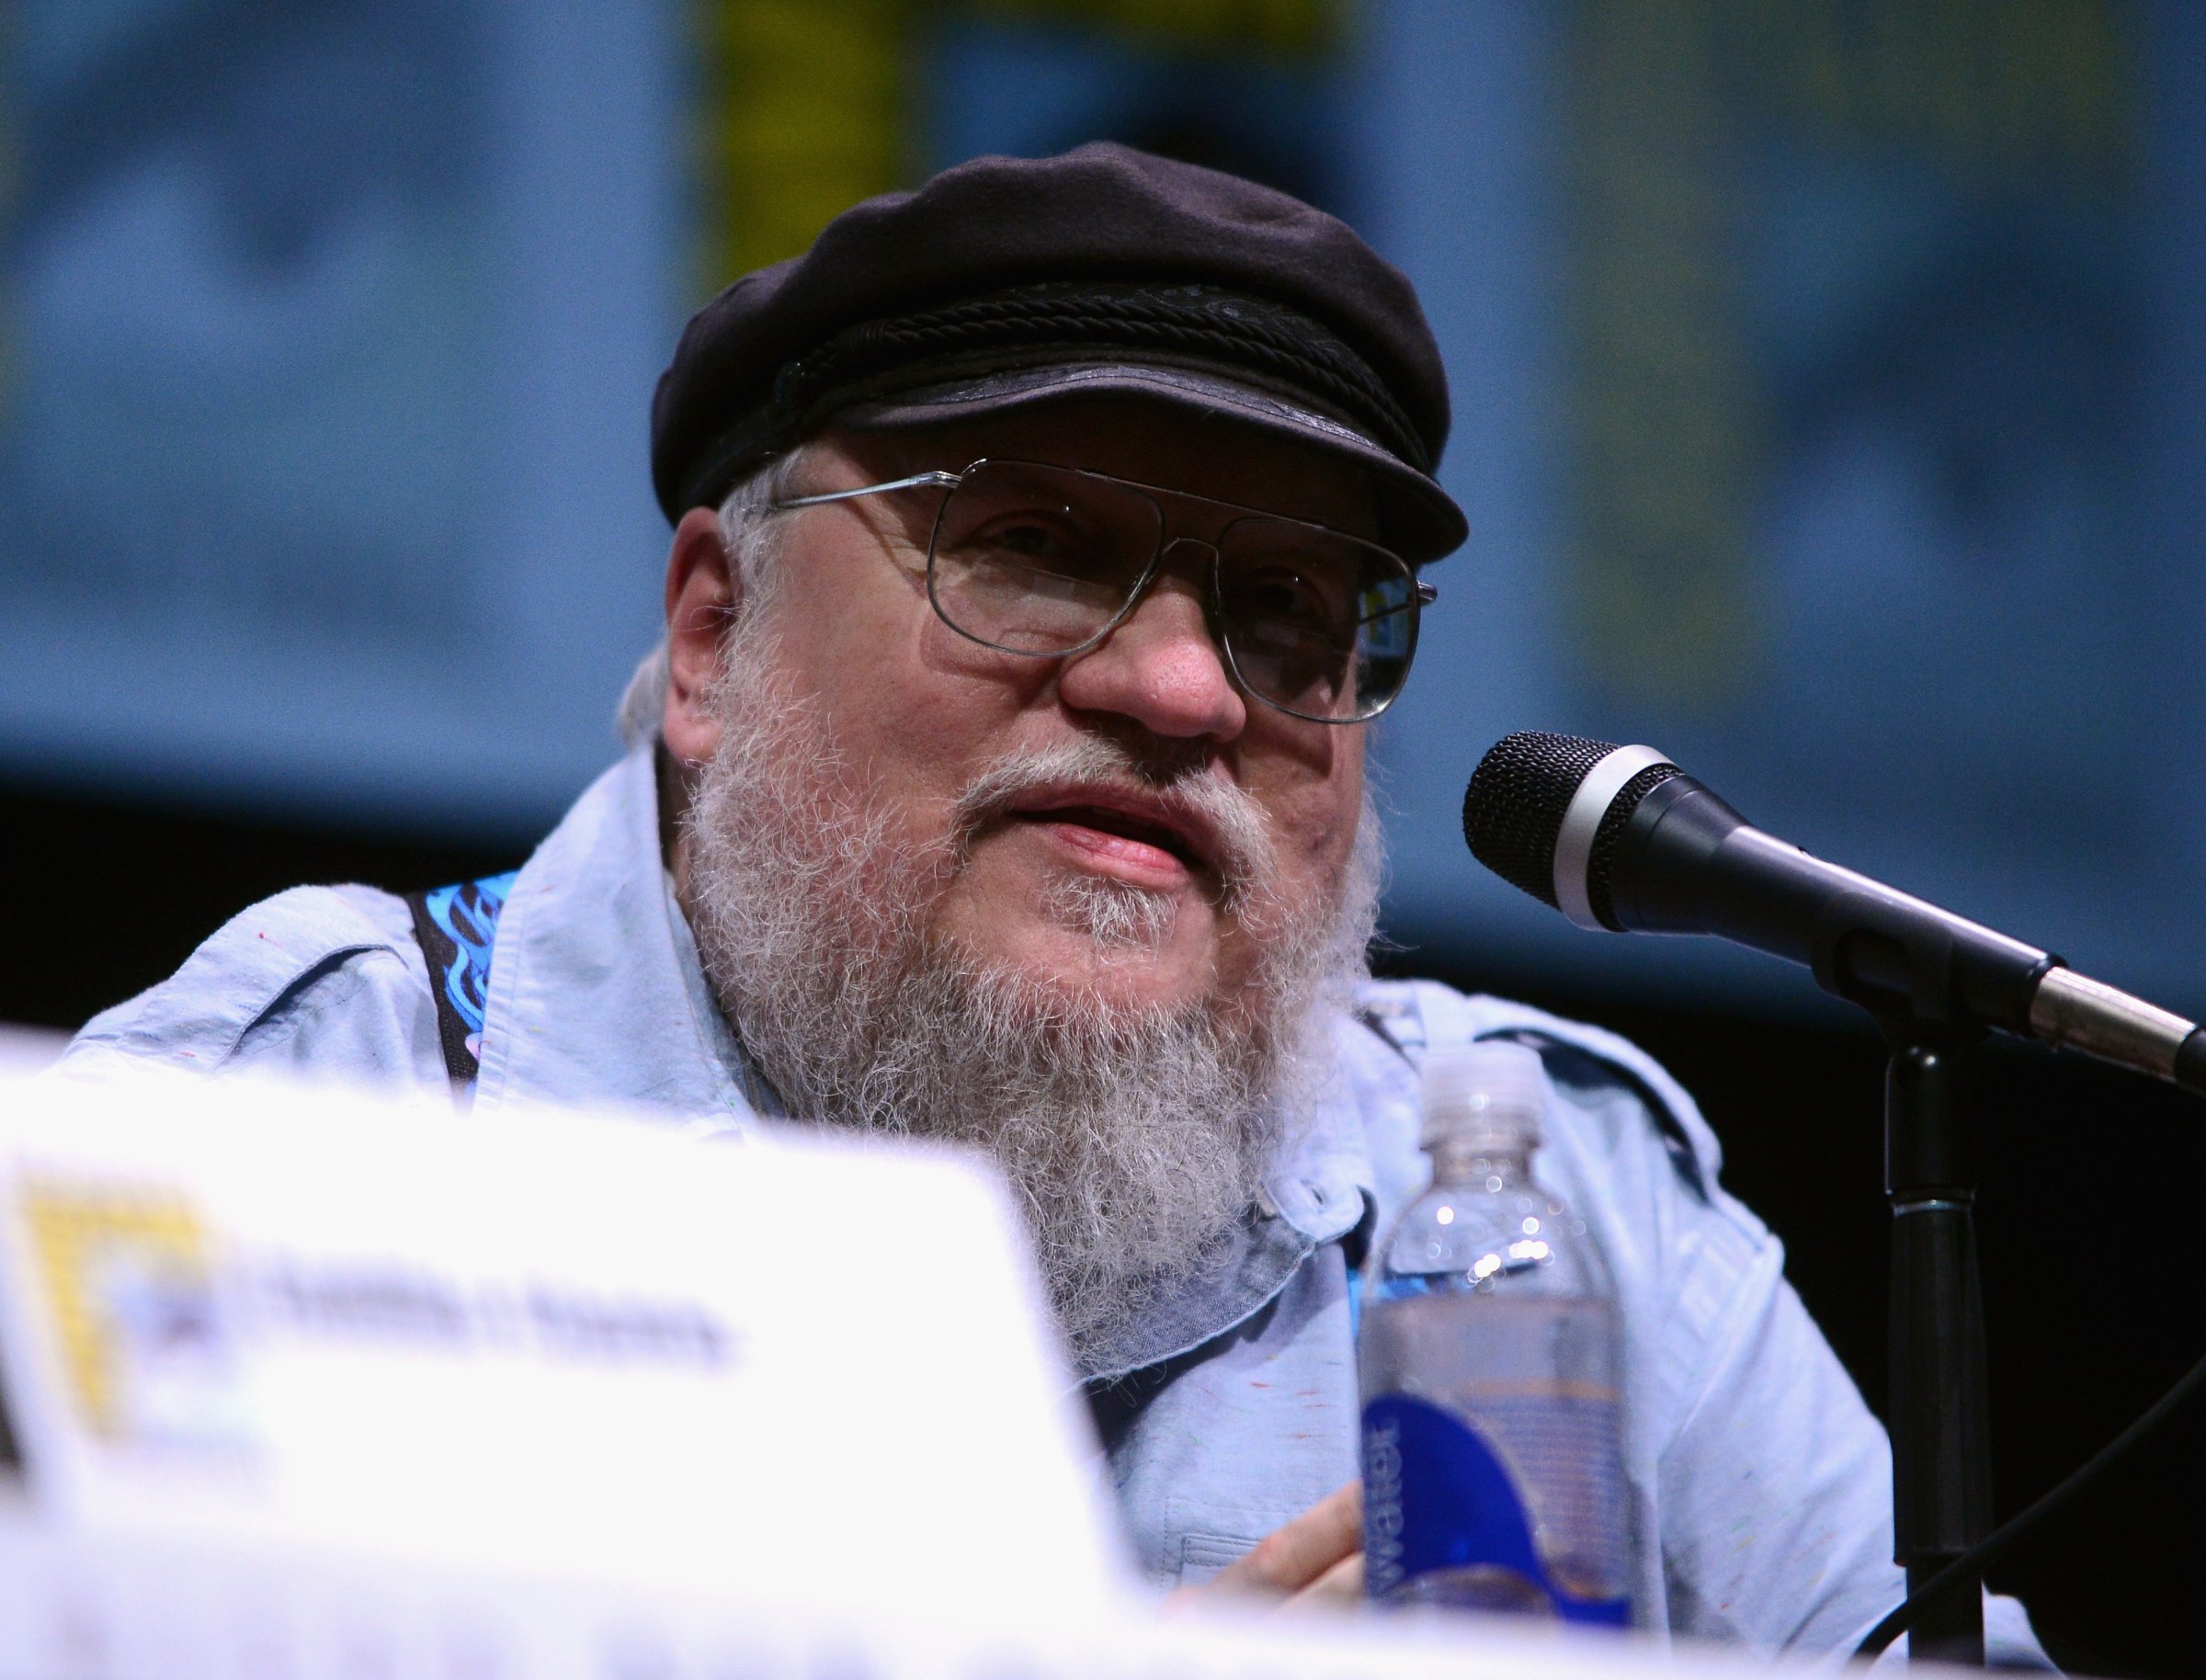 George R.R. Martin at the "Game Of Thrones" Panel - Comic-Con International 2013